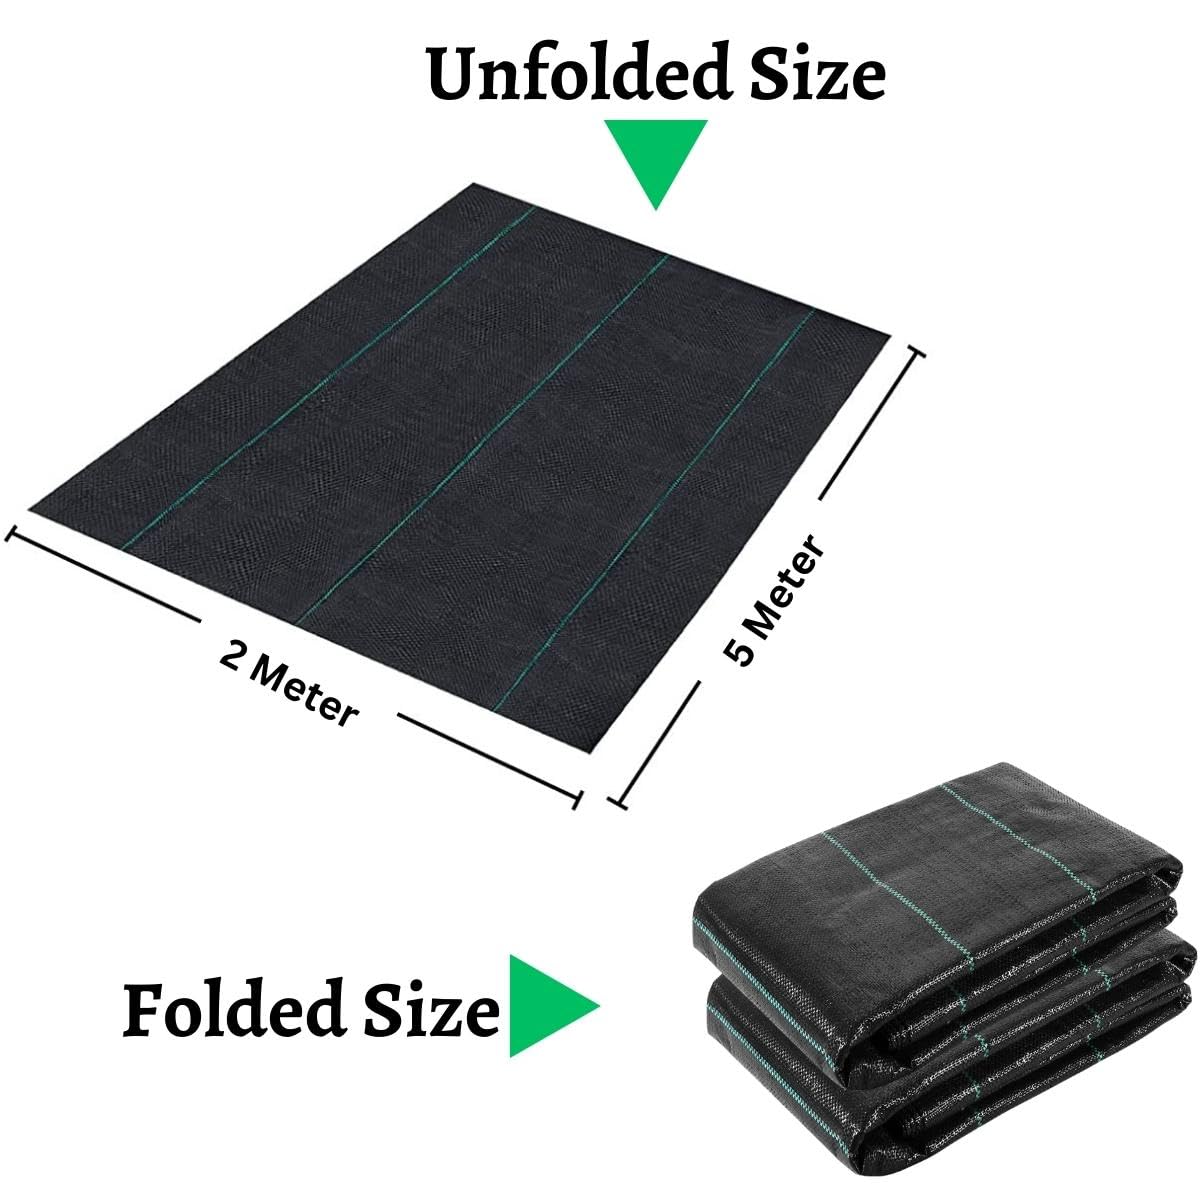 Singhal Premium Garden Weed Control Barrier Sheet Mat 2 x 5 Mtr, Landscape Fabric 90 GSM Heavy Duty Weed Block Gardening Mat for Gardens, Agriculture, Outdoor Projects (Black) (2x5 Meter)